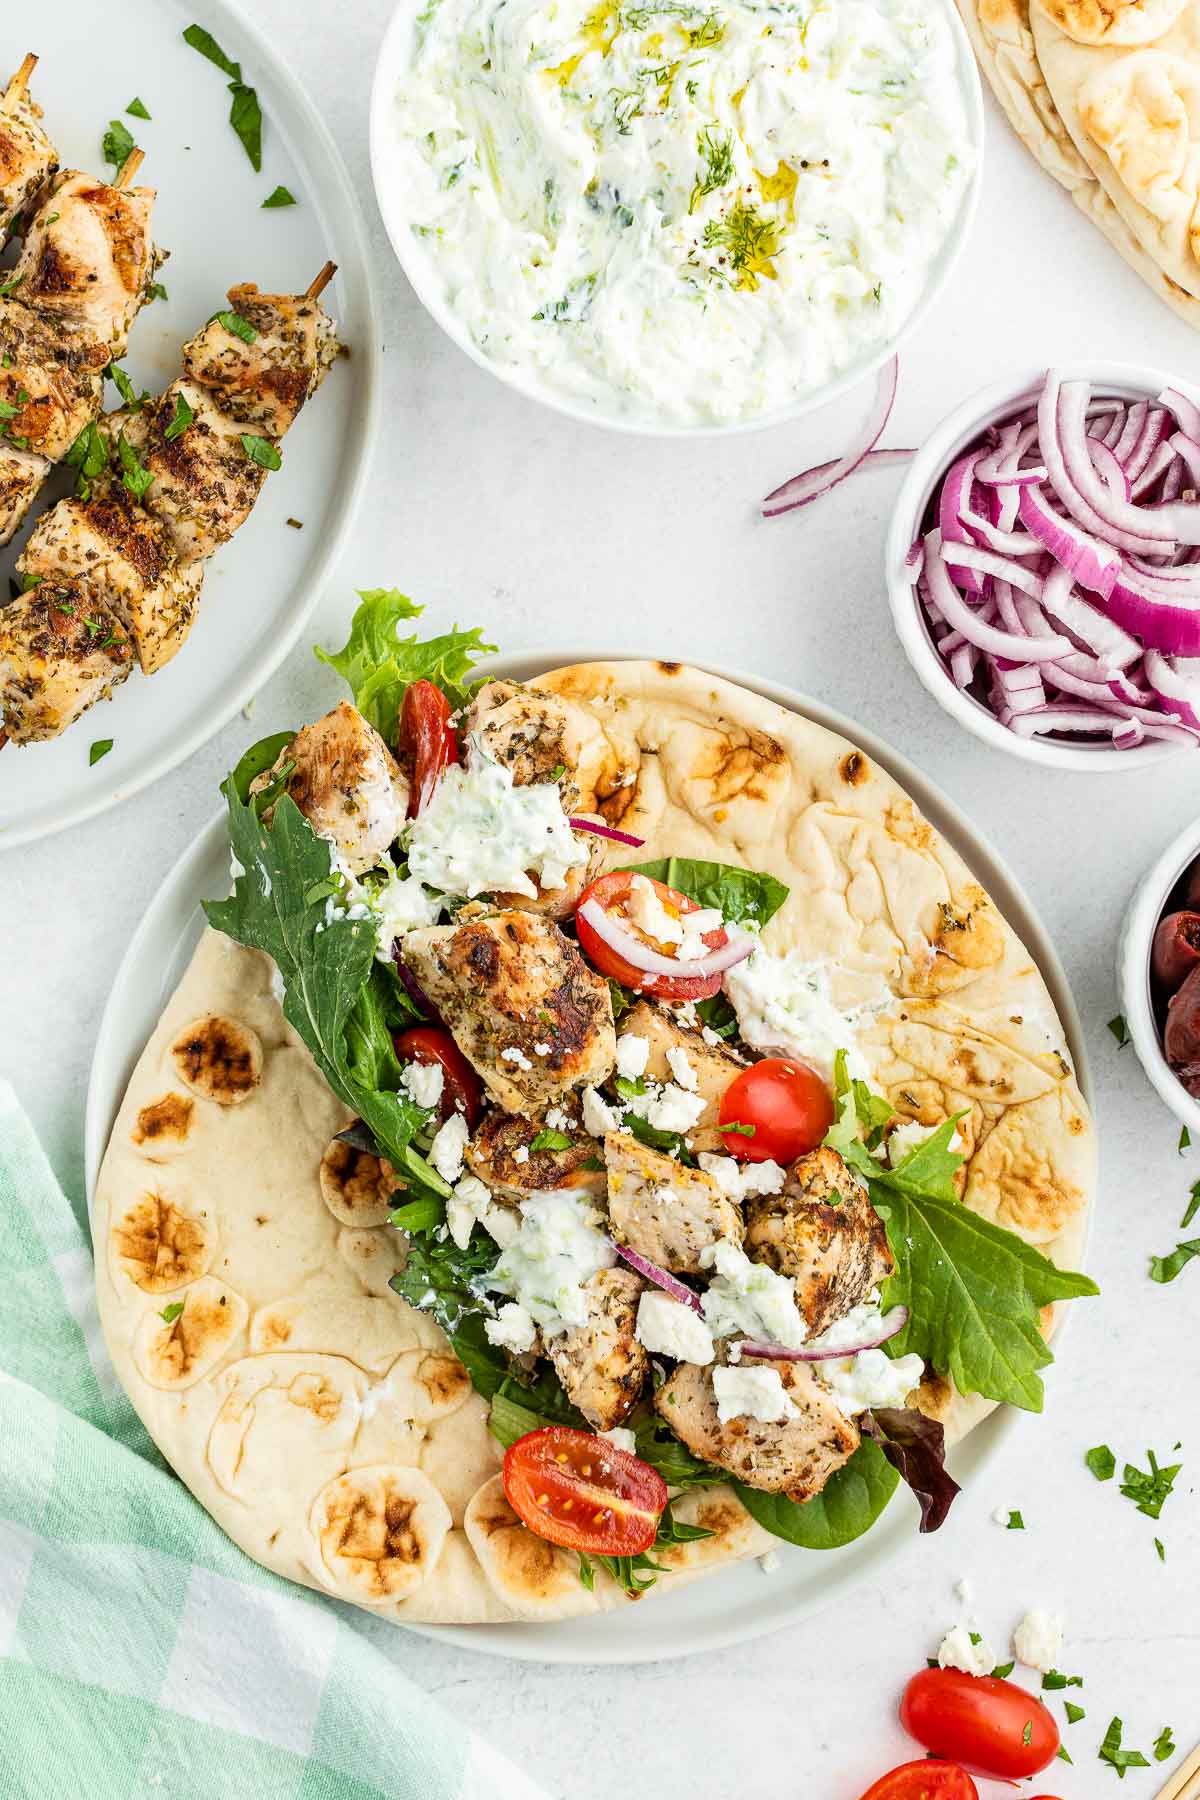 Grilled Chicken Souvlaki on soft flatbread bread with vegetables and feta cheese